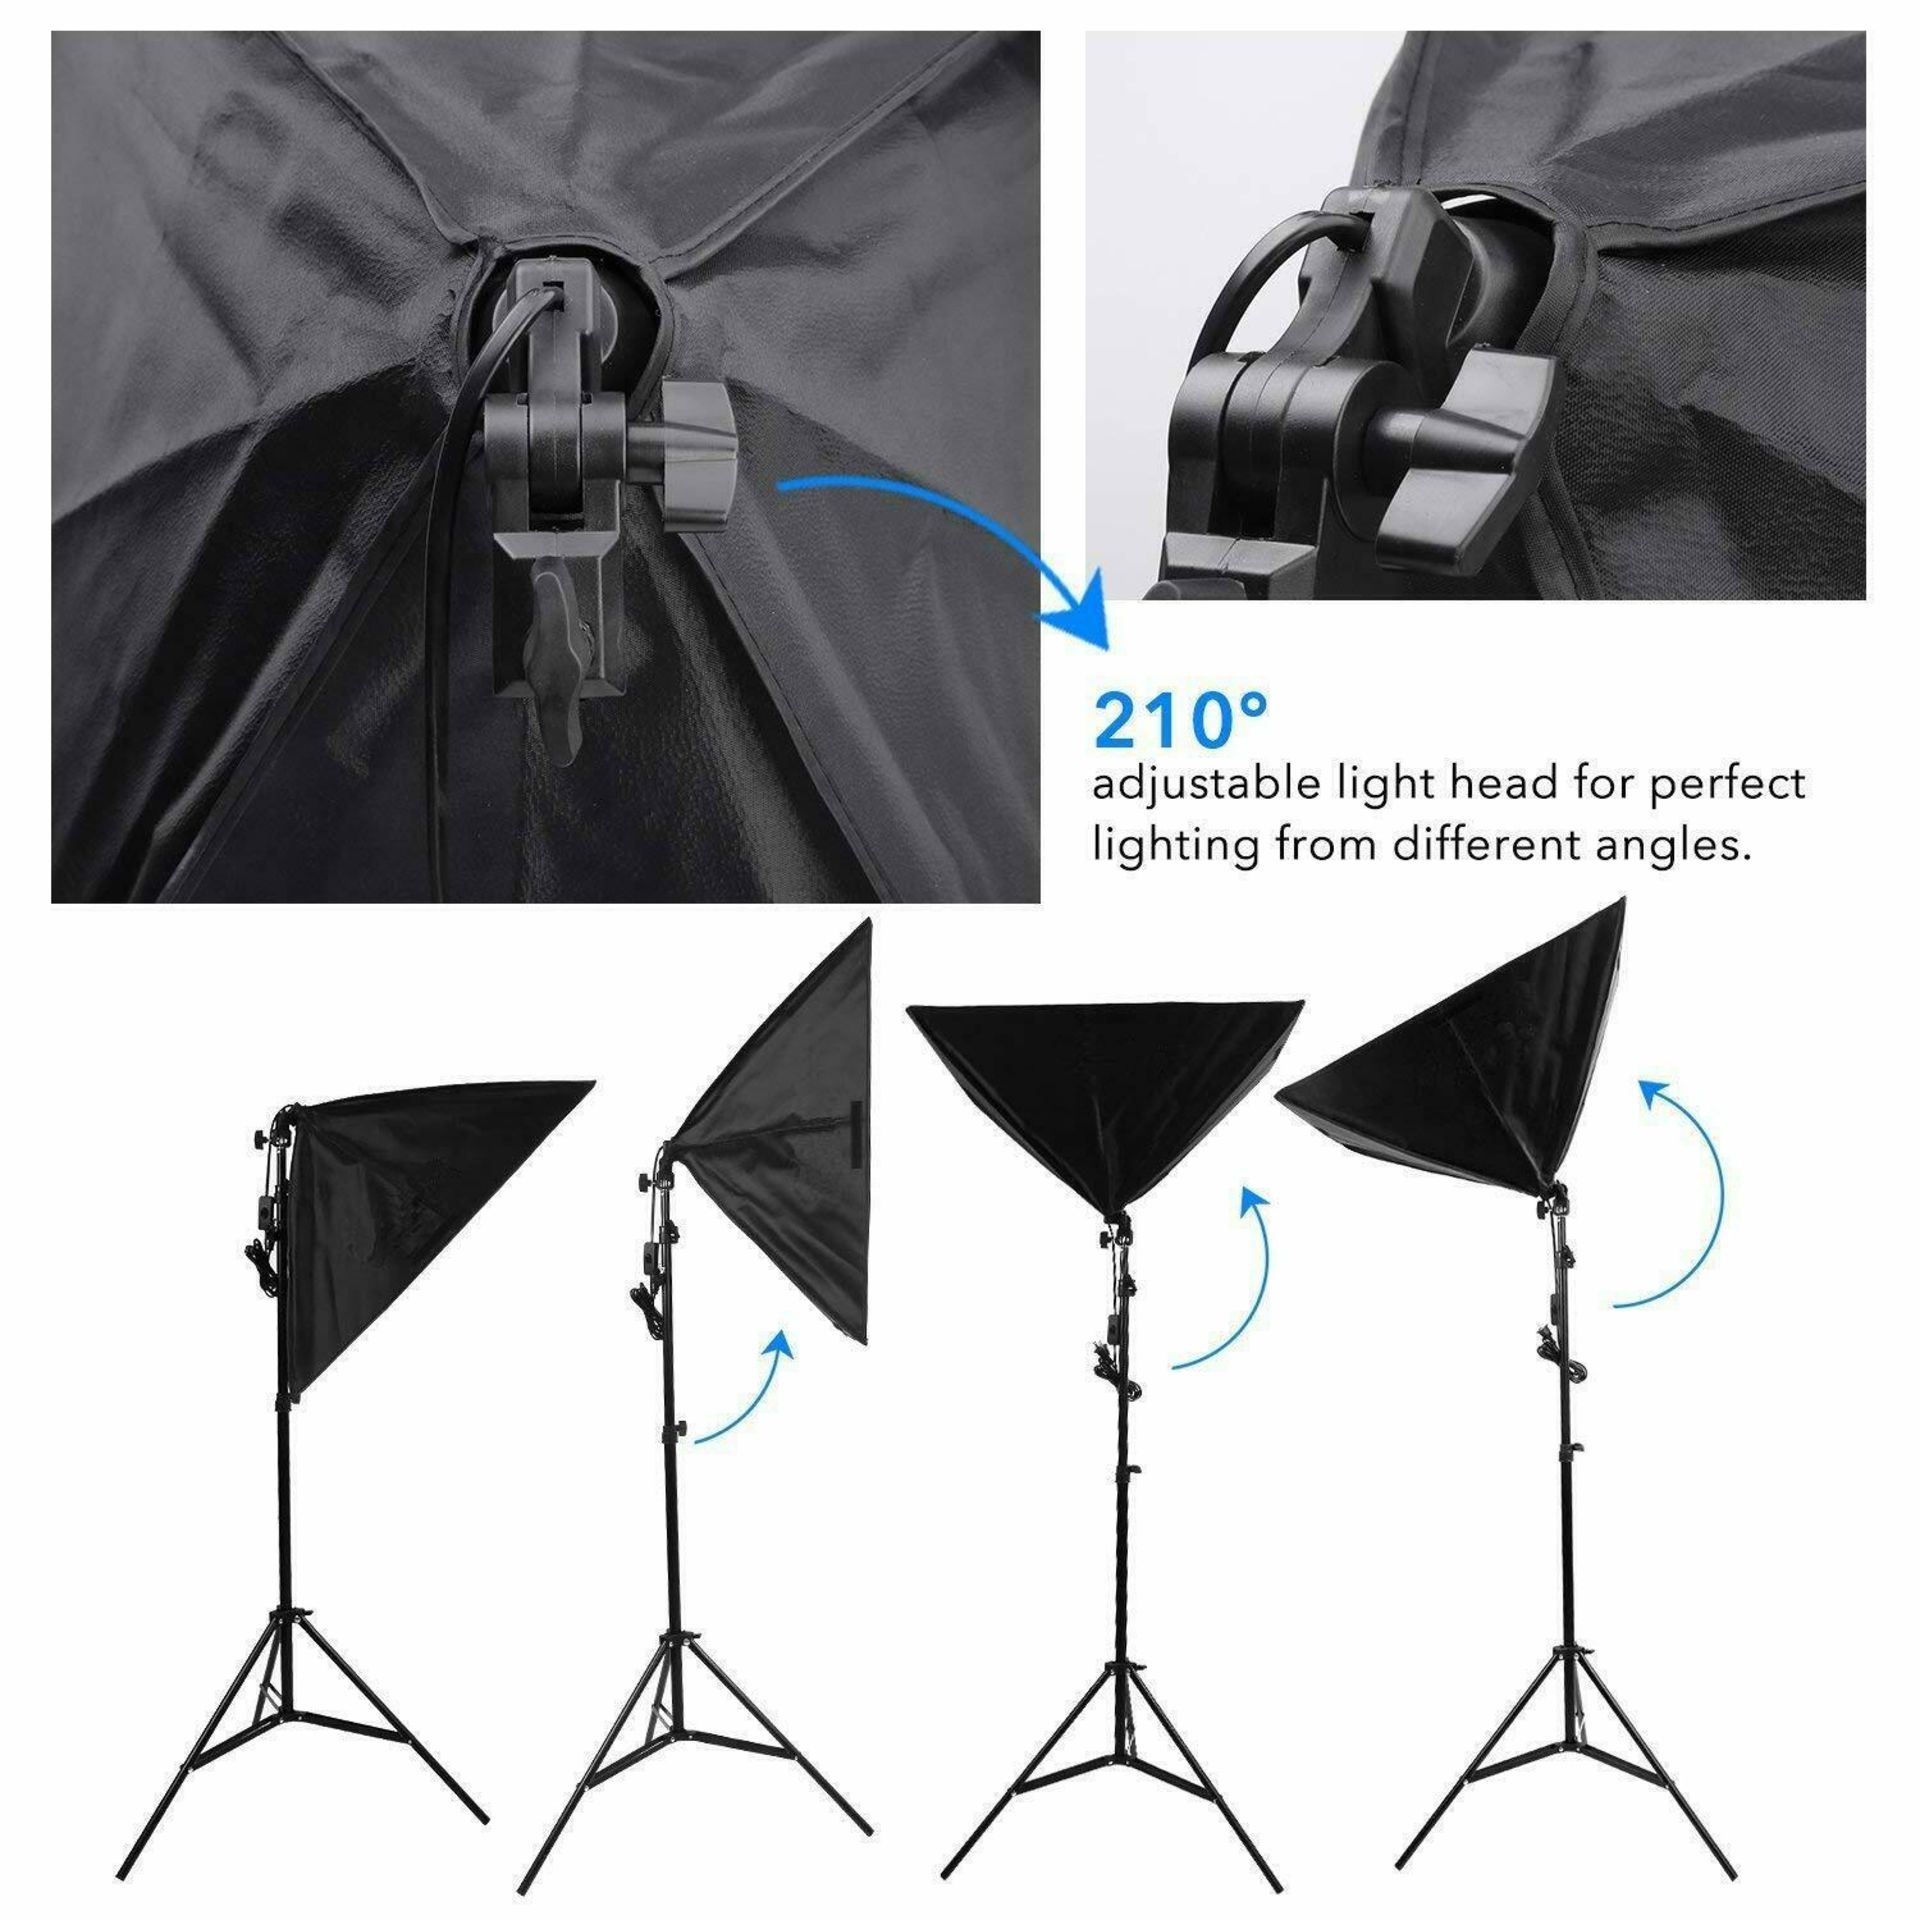 Pair of Photography Studio Continuous Lighting Softbox Light Kit with stand - Image 2 of 4